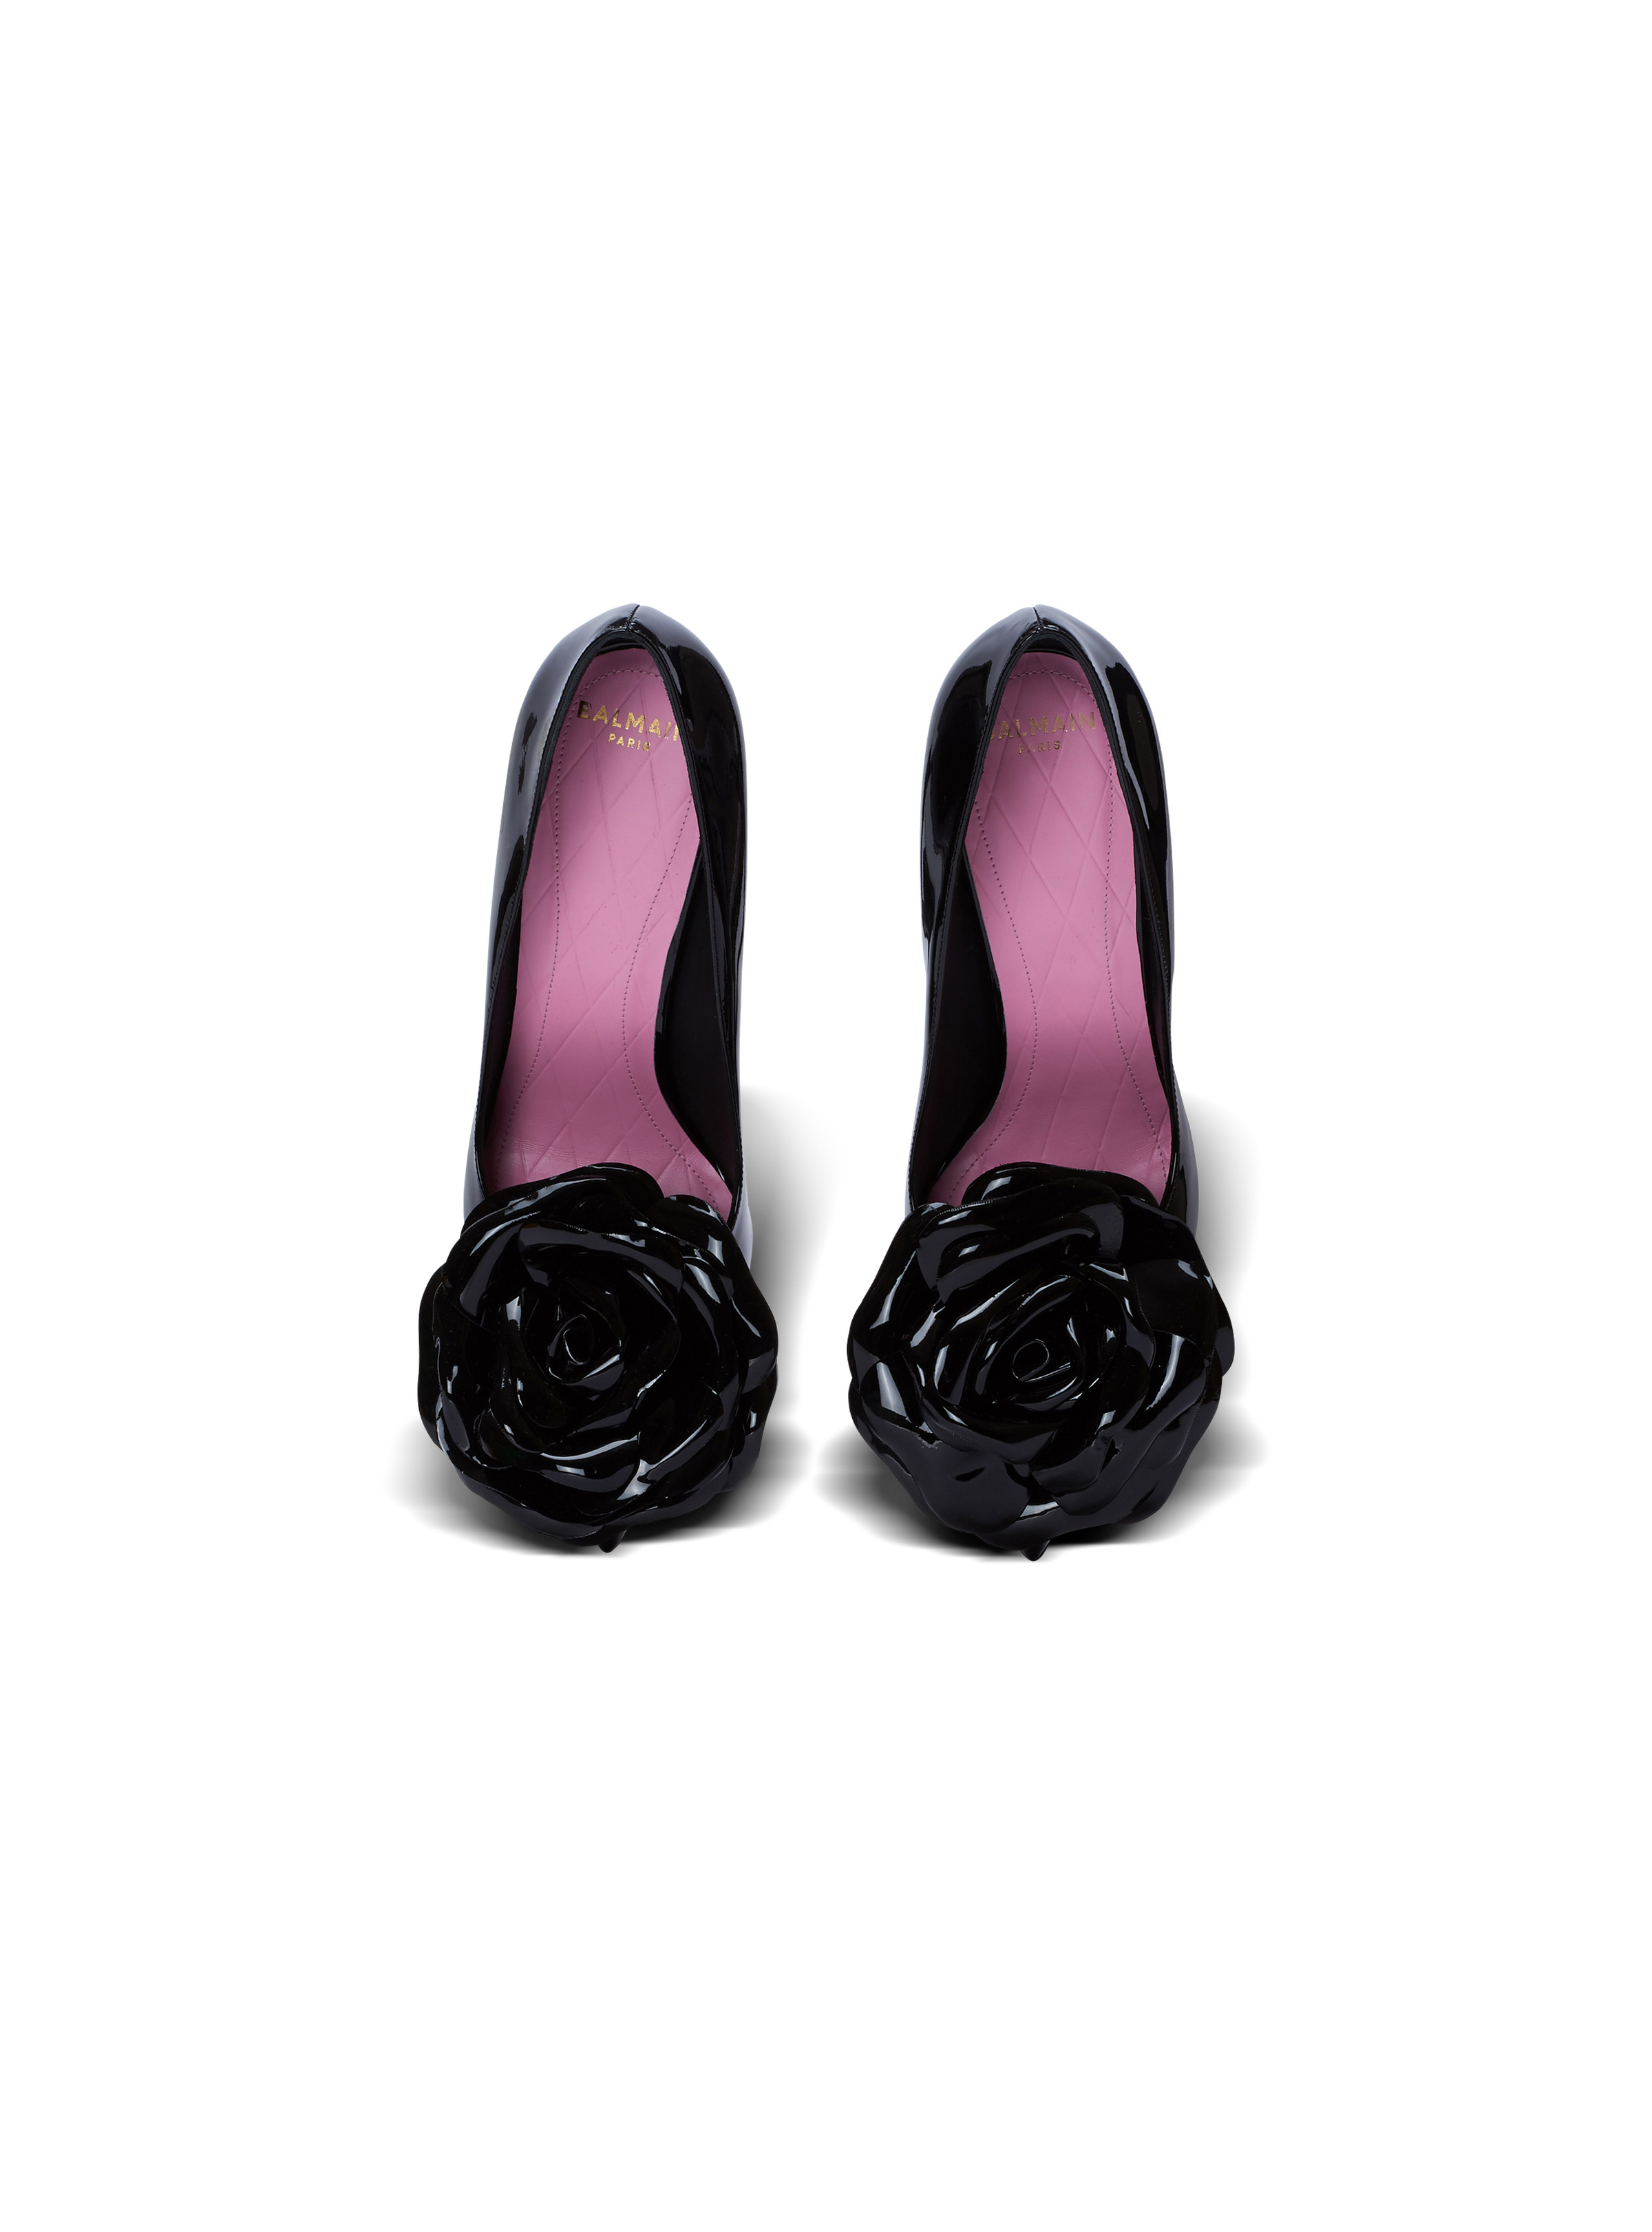 Patent leather Ruby pumps with flower detail - 3